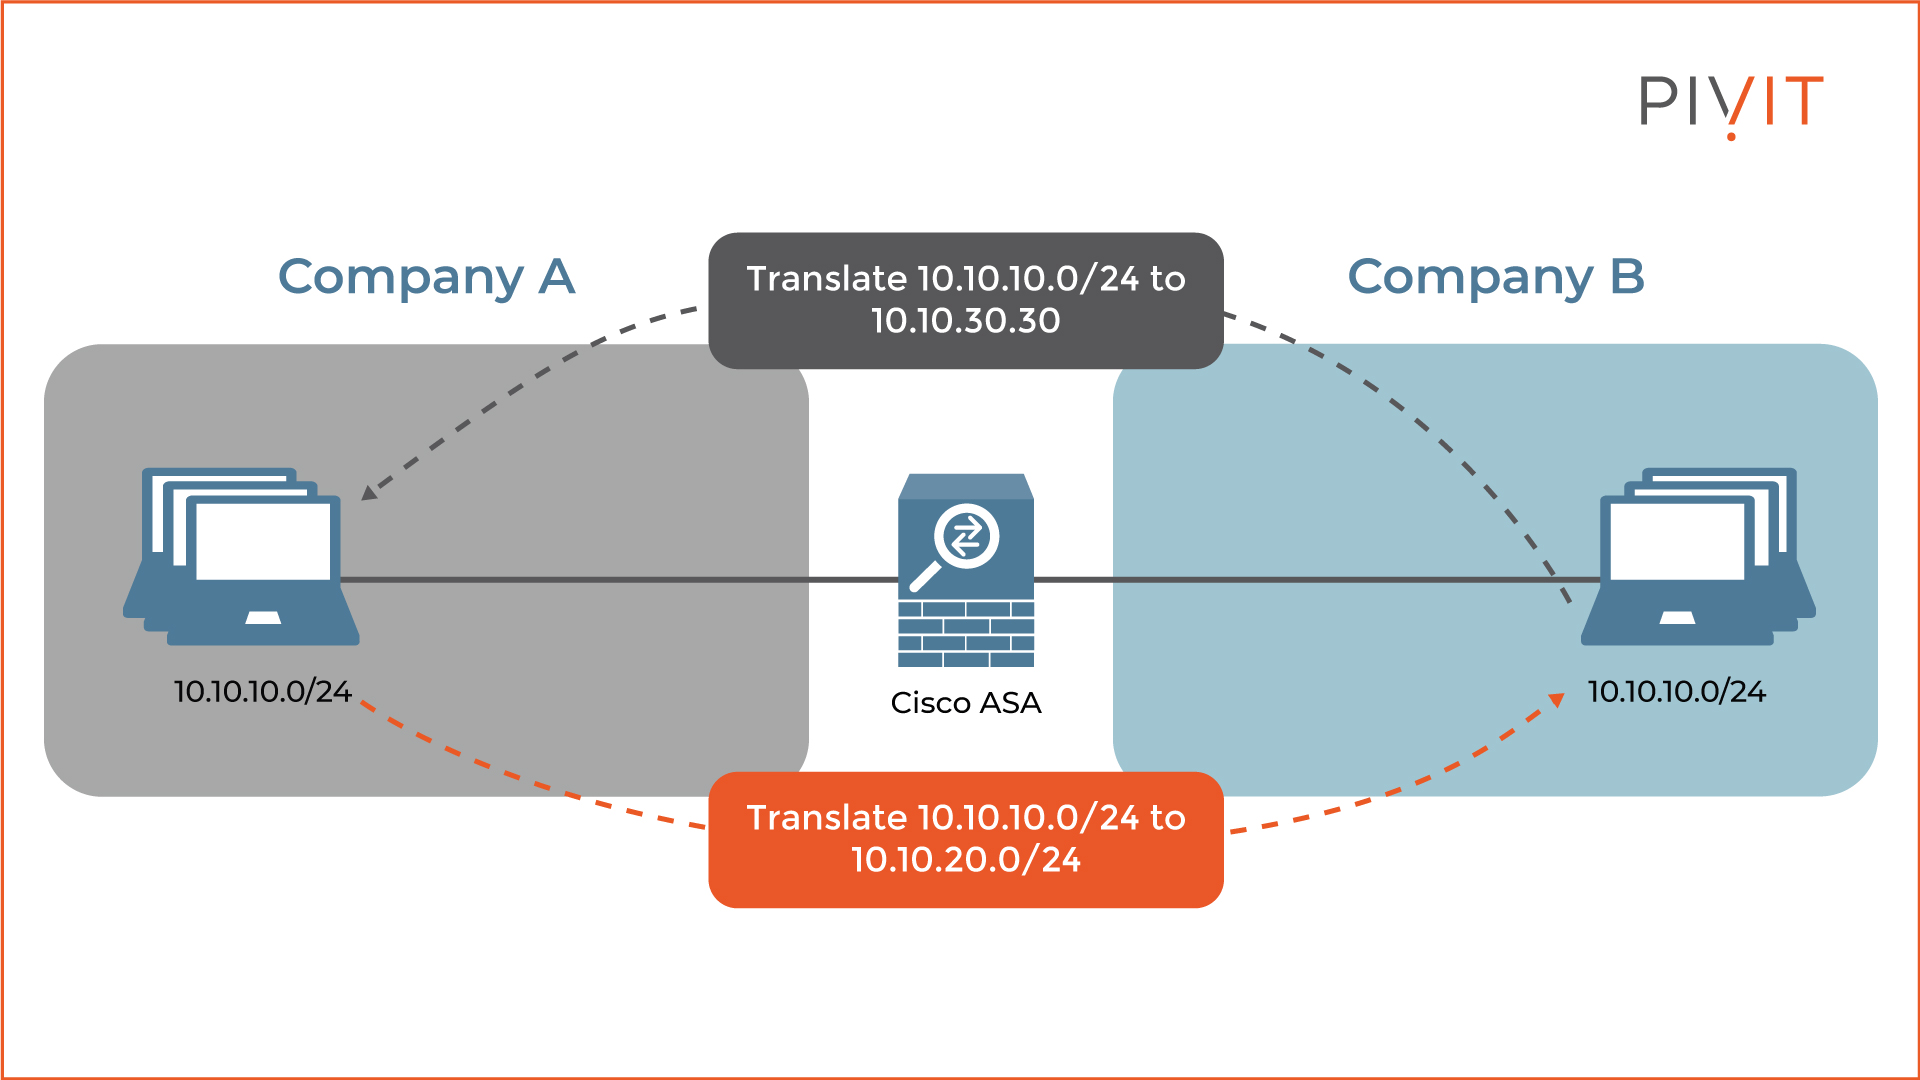 Cisco ASA performs twice NAT translation on the networks of companies A and B because of their overlapping IP address space